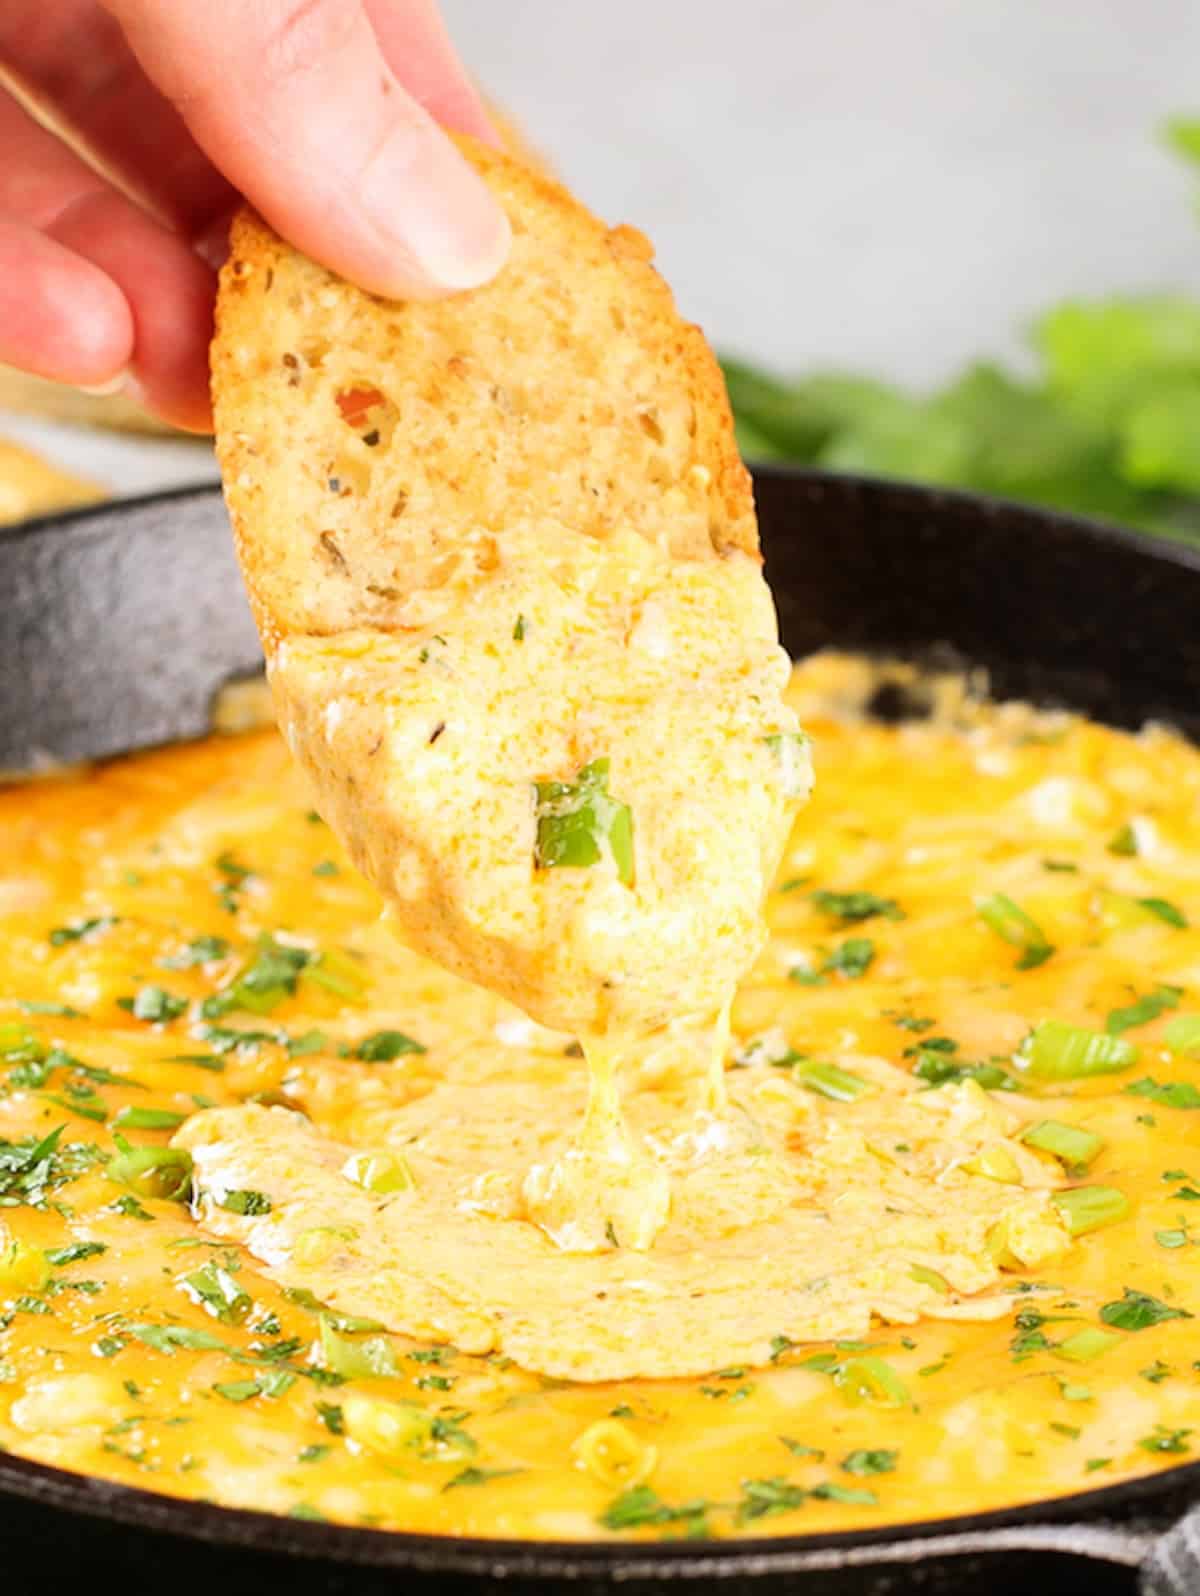 Bread being dunked into a skillet of Cheesy Buffalo Shrimp Dip.